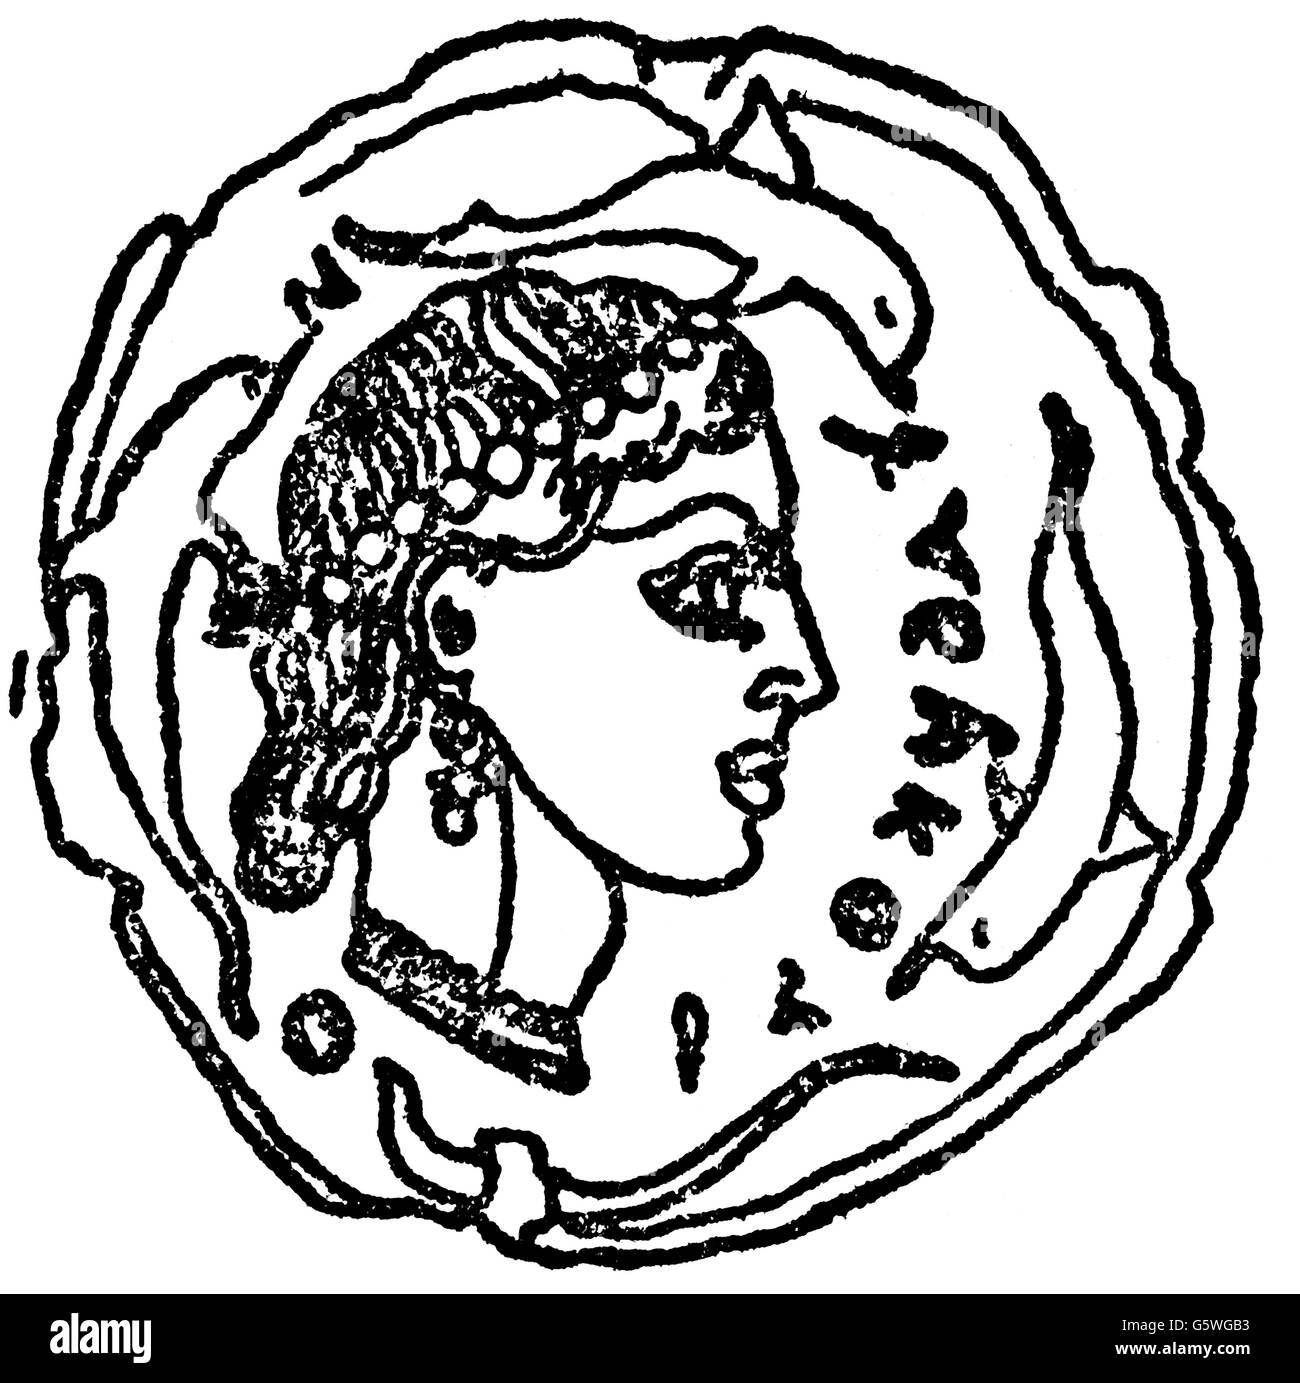 money / finances, coins, ancient world, Greece, coin, portrait of the nymph Arethusa, Syracuse, circa 465 BC, drawing, 20th century, ancient world, ancient times, Greek, Grecian, numismatics, religion, religions, deity, divinity, deities, portrait, profile, side-face, profiles, dolphin, dolphins, tutelary goddess of Syracuse, nymph, nymphs, coin, coins, historic, historical, ancient world, woman, women, female, people, Additional-Rights-Clearences-Not Available Stock Photo